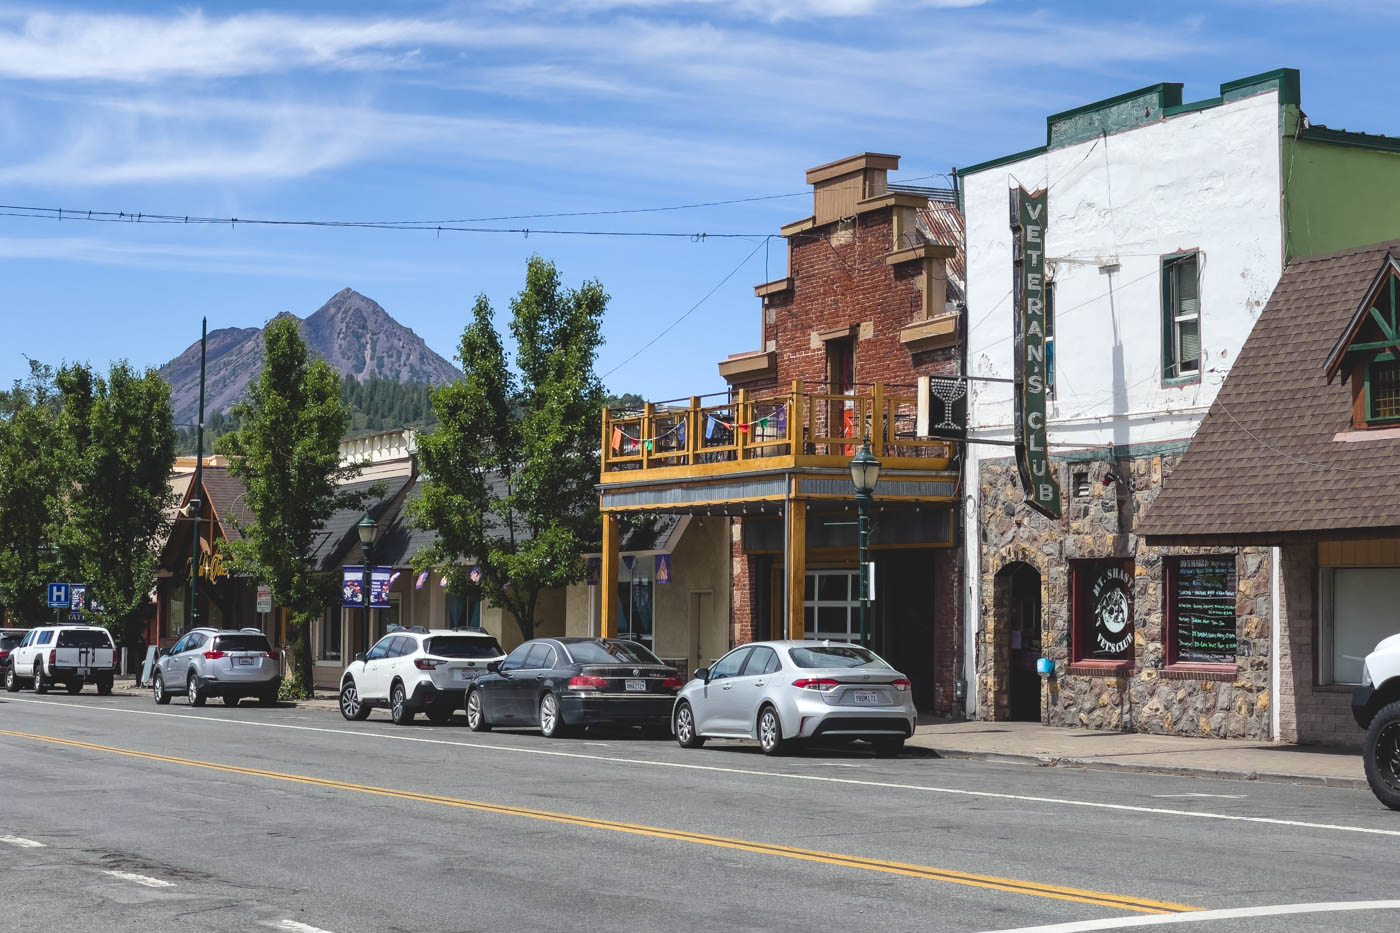 A main road of Mount Shasta with a couple of historic looking buildings and a mountain in the distance.